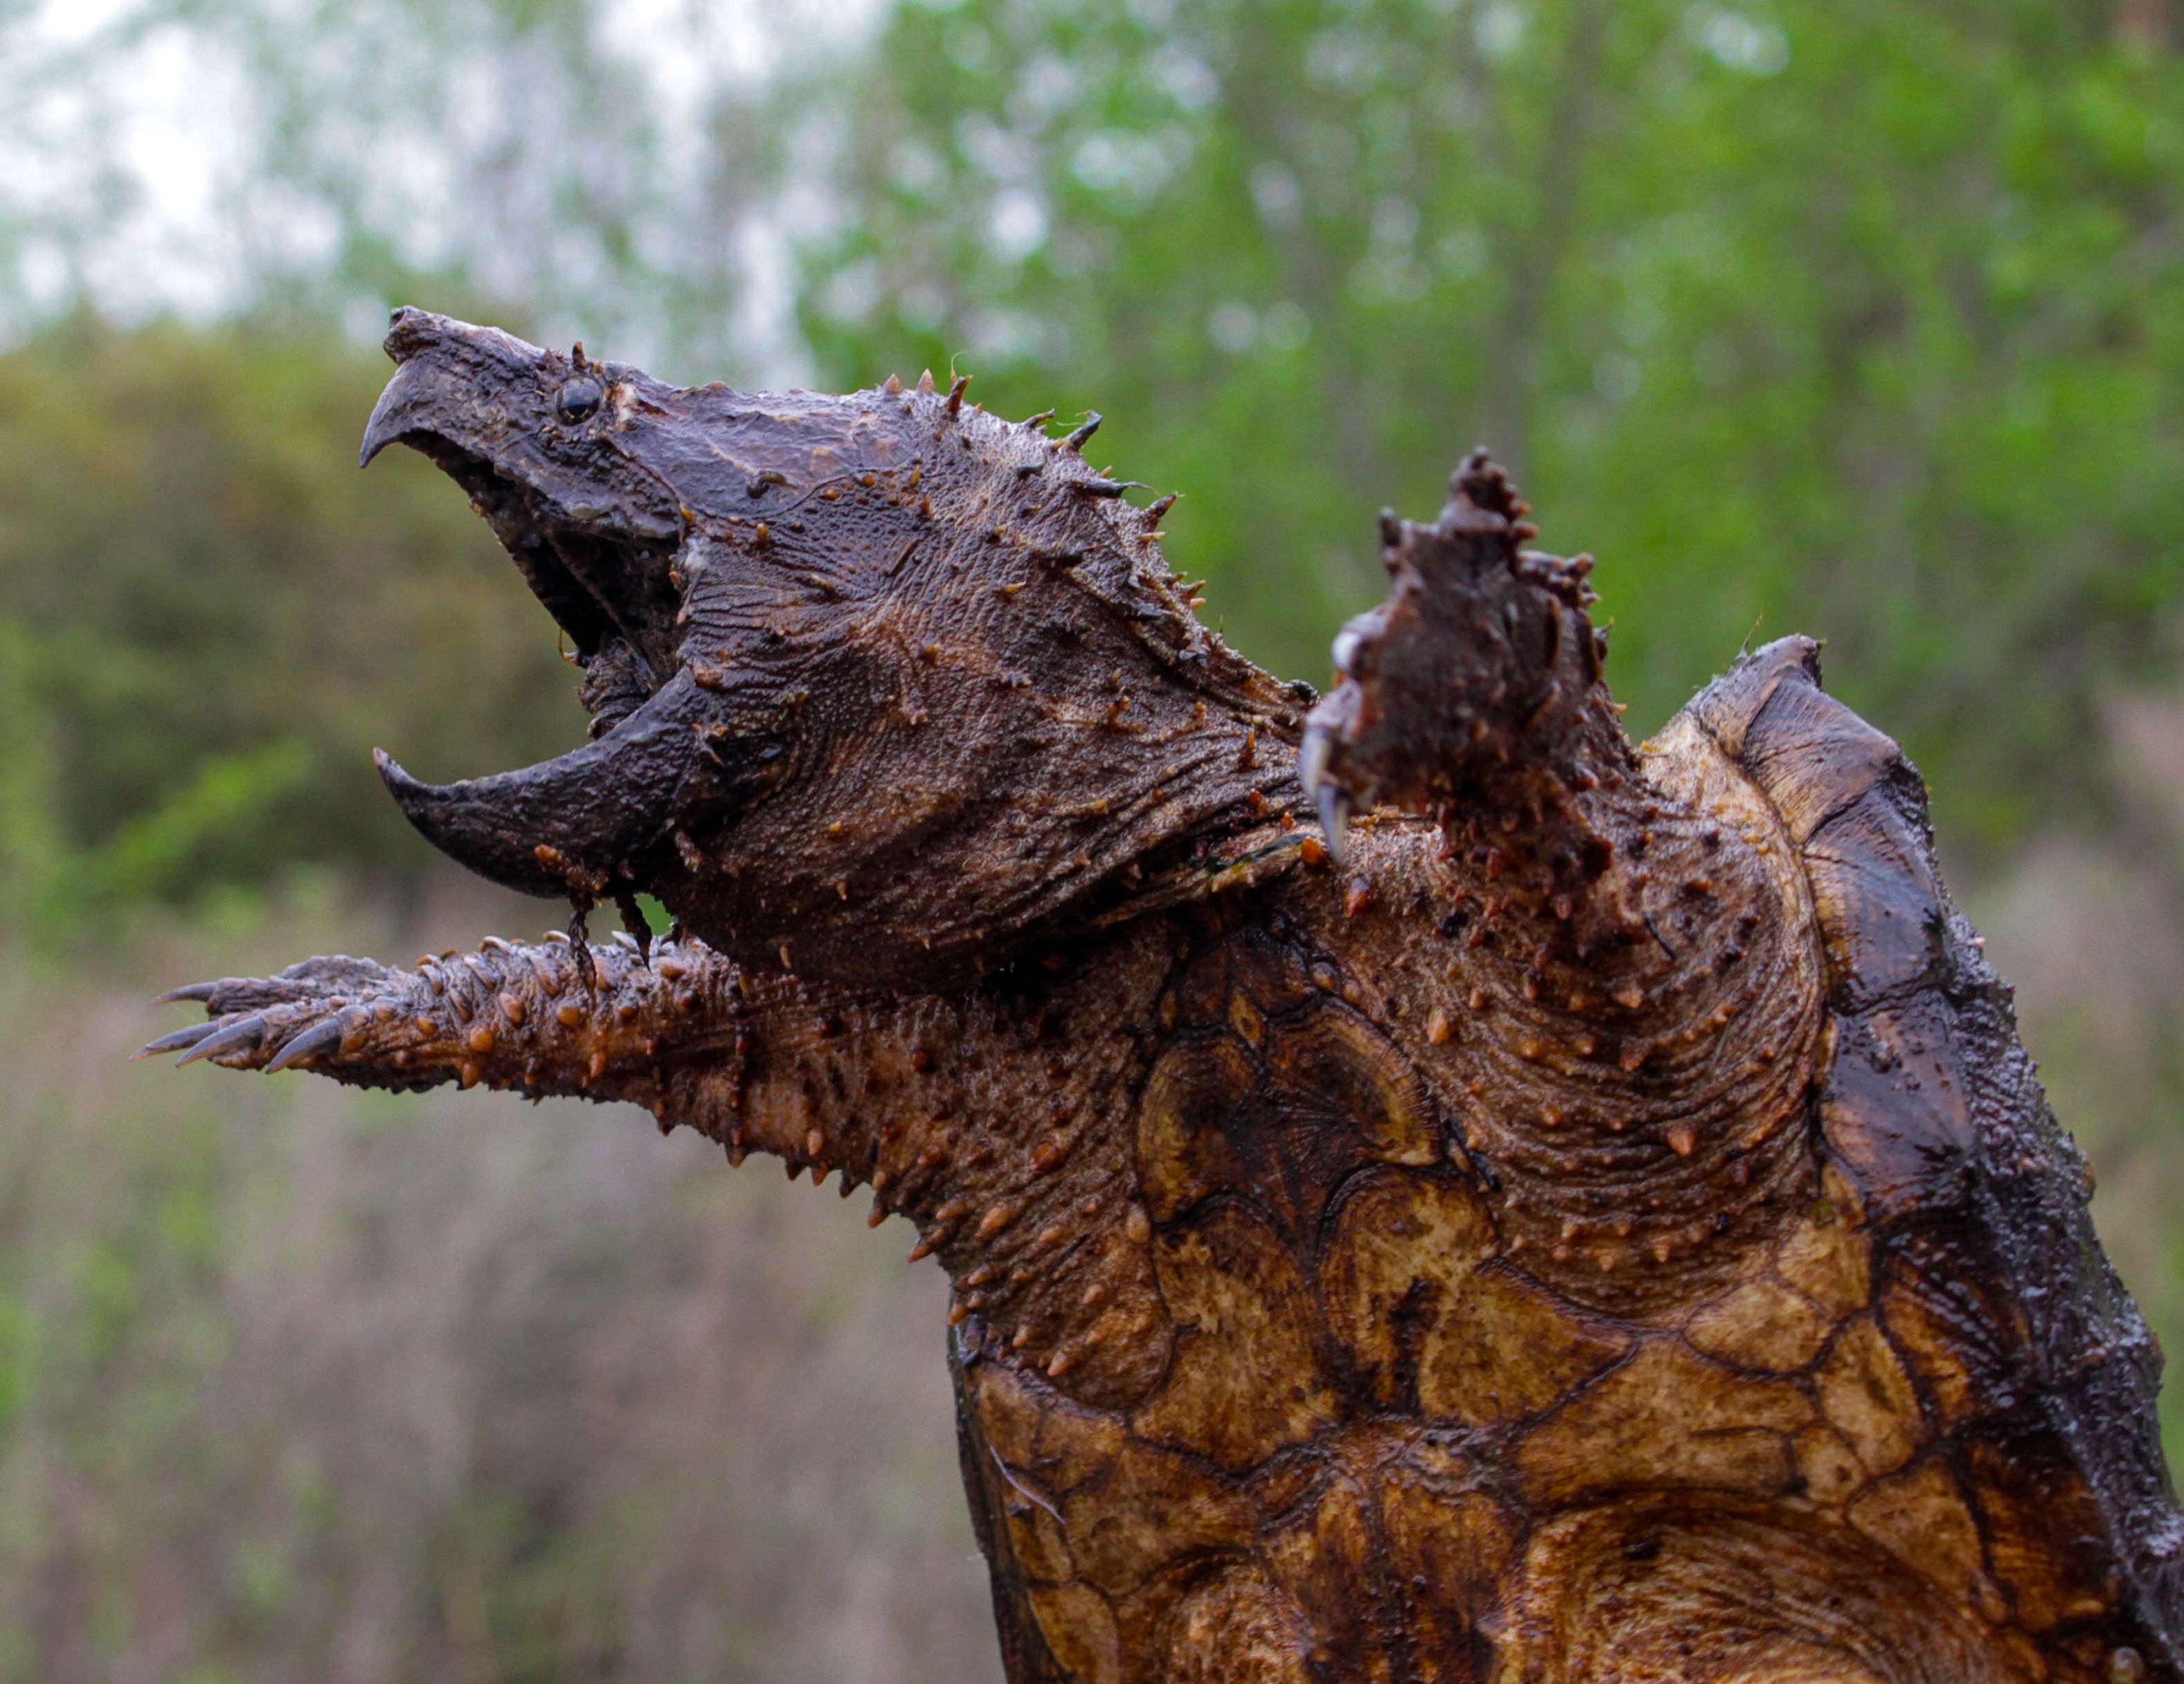 Alligator Snapping Turtle #9